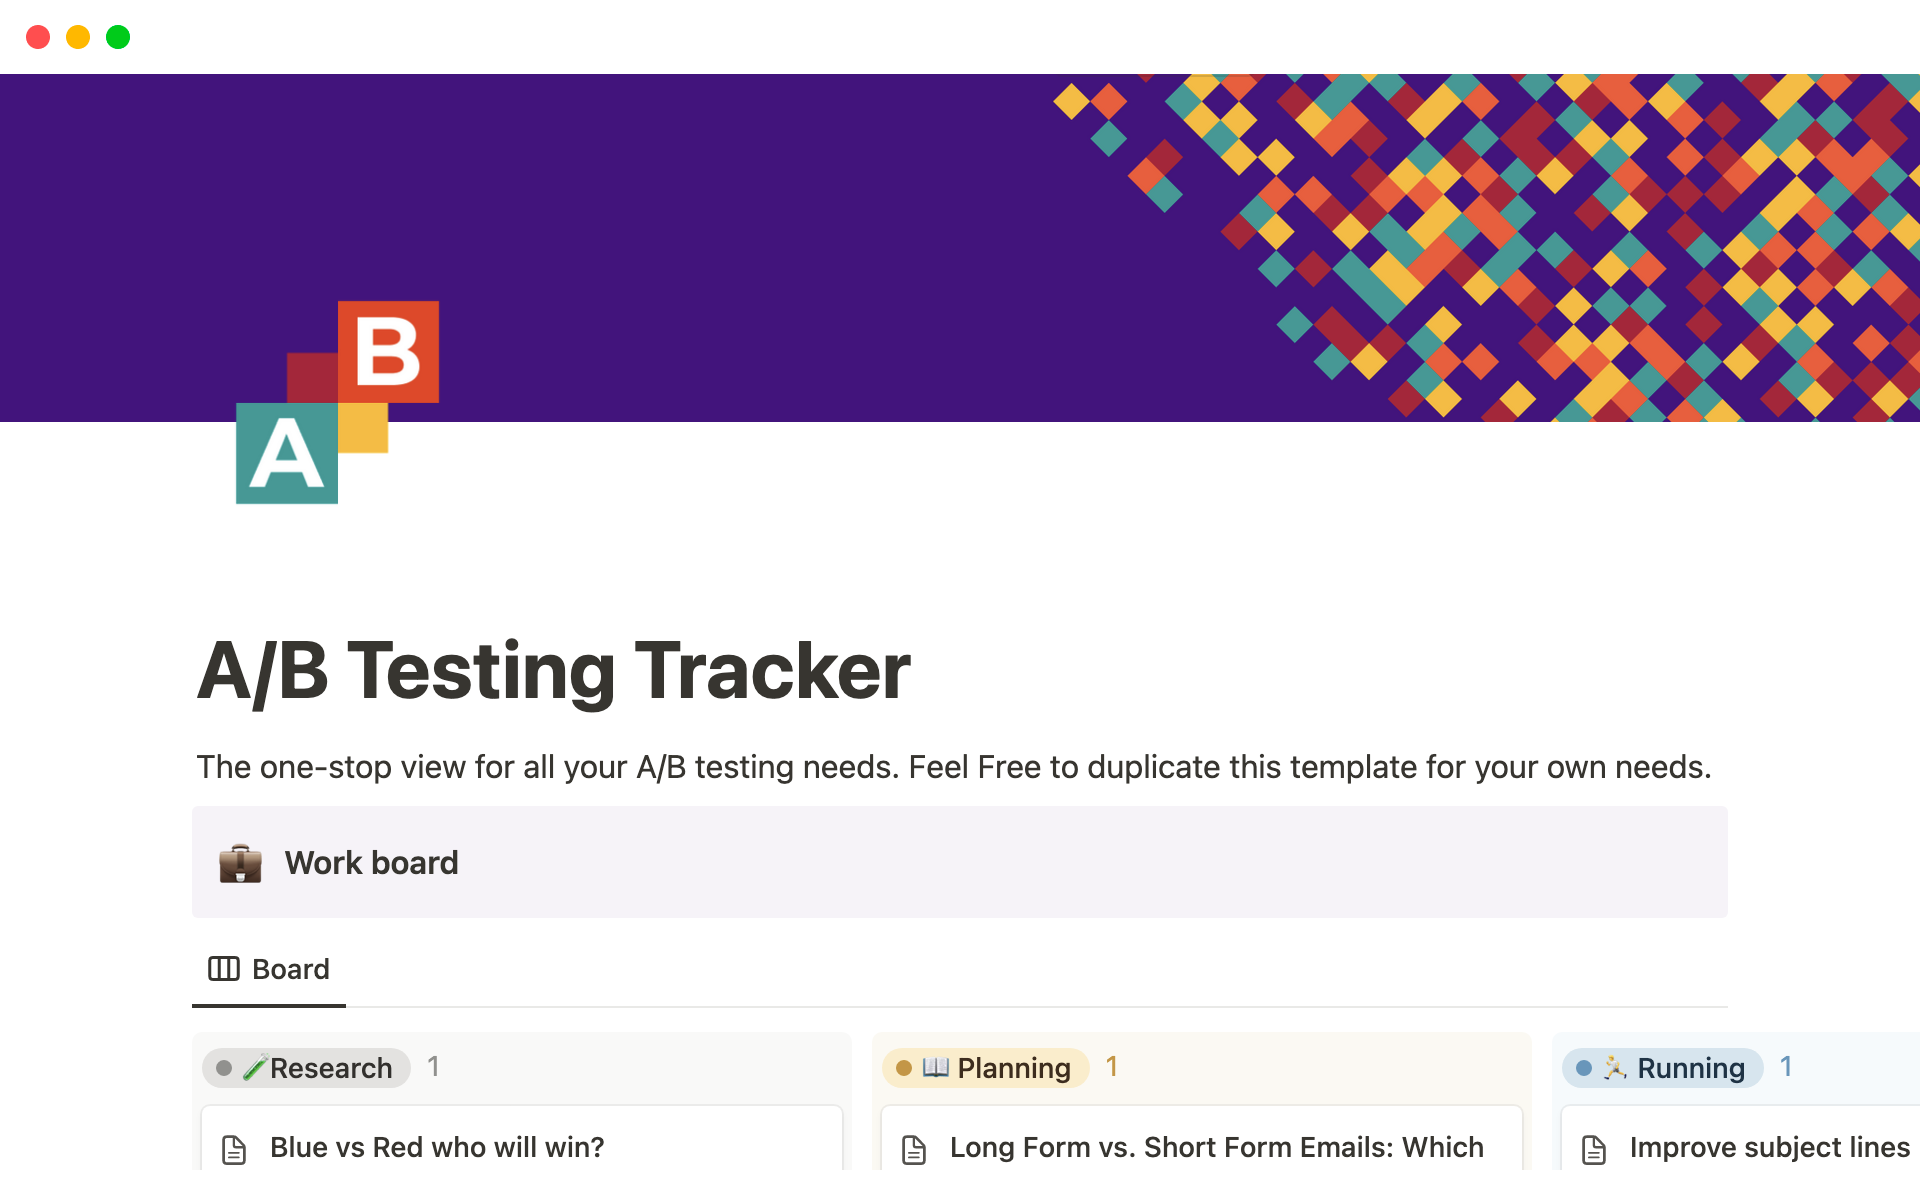 Keep track of all your A/B tests in one place.